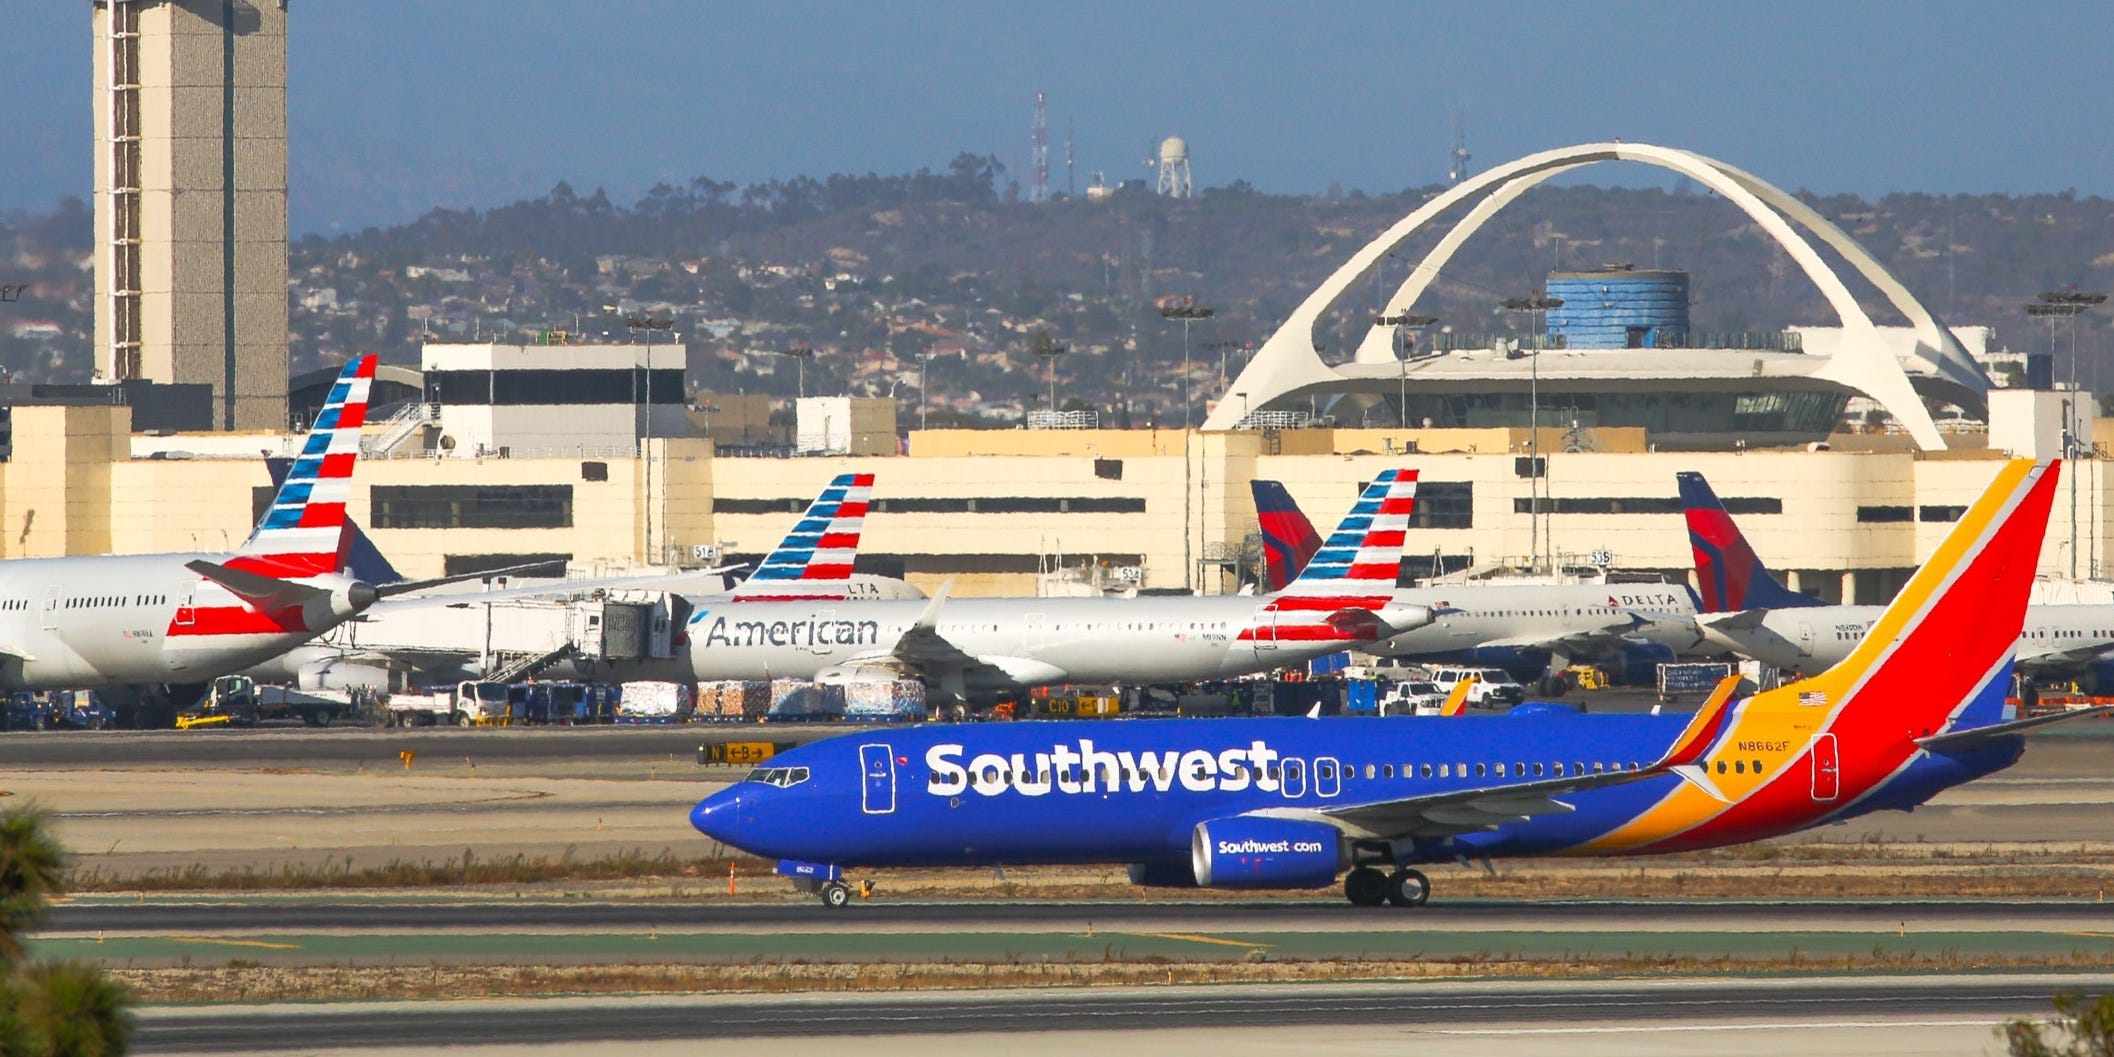 A Southwest Airlines plane lands at Los Angeles International Airport next to American Airlines planes.